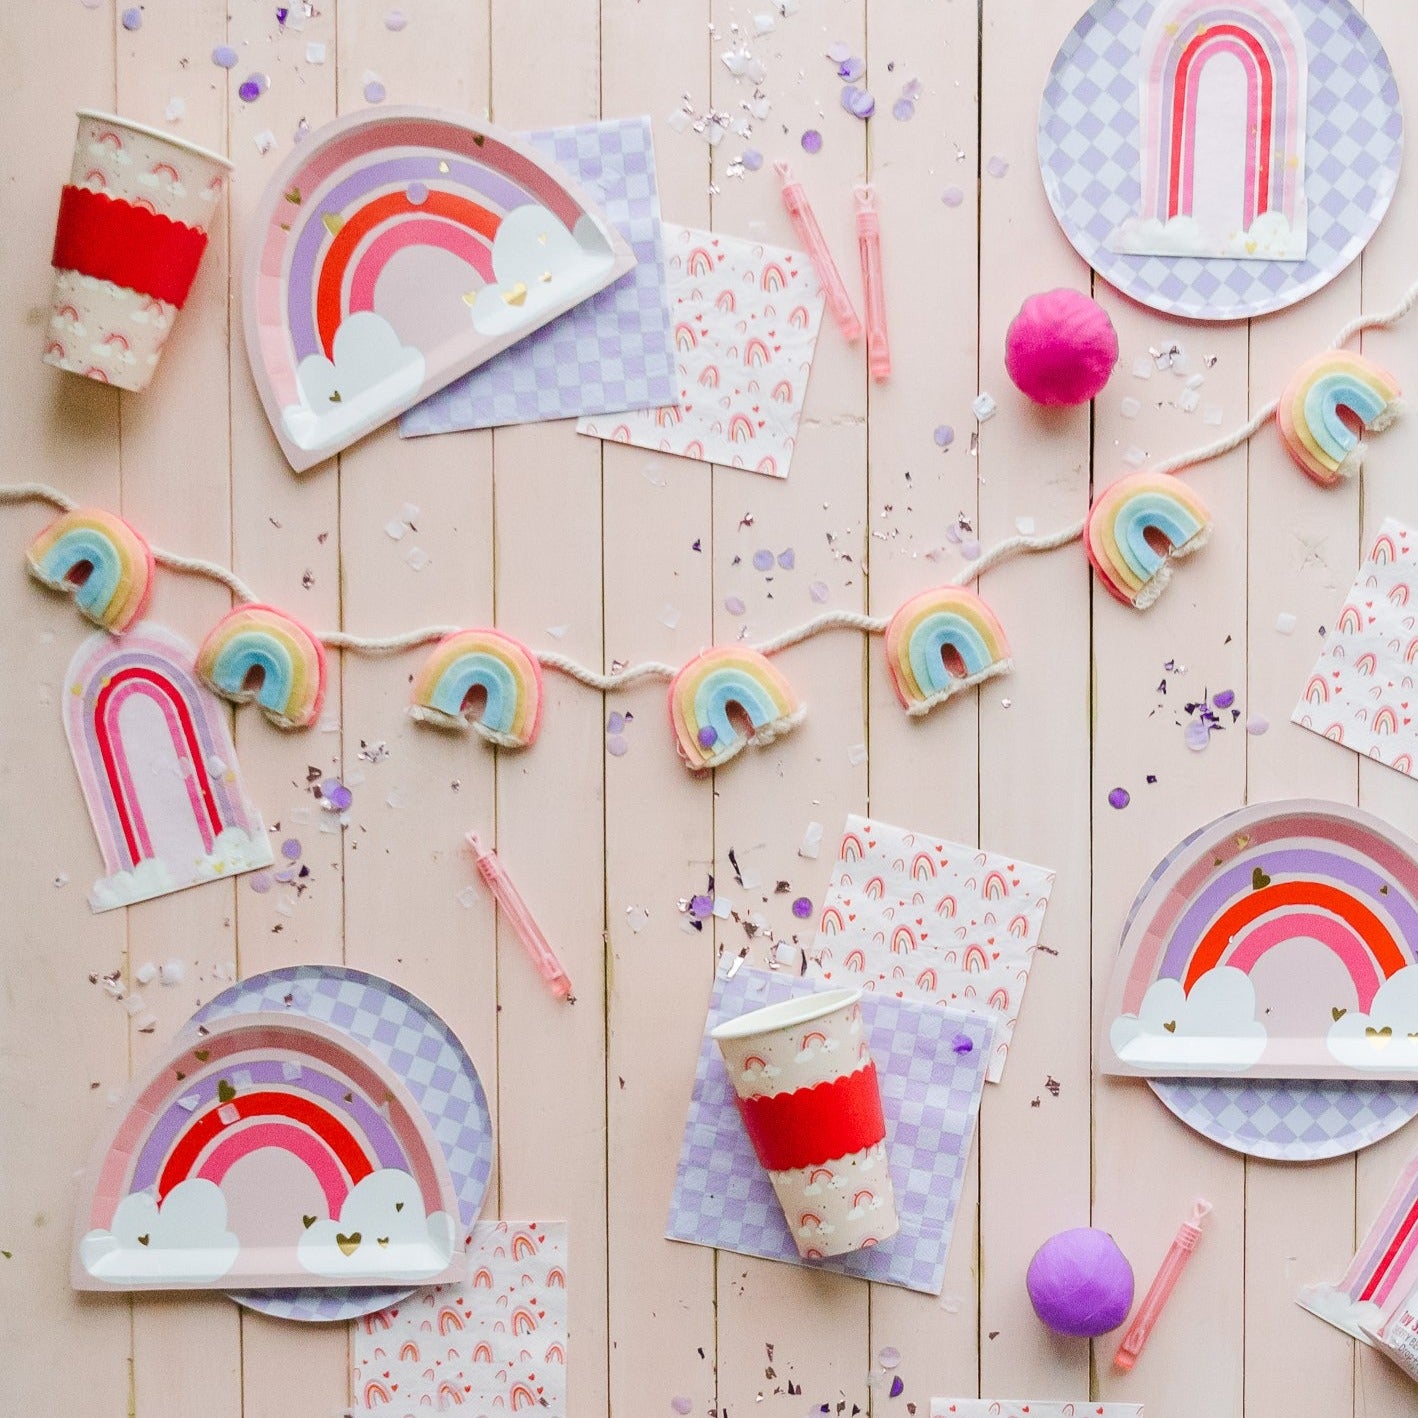 Rainbow party supplies to use for any rainbow theme party.